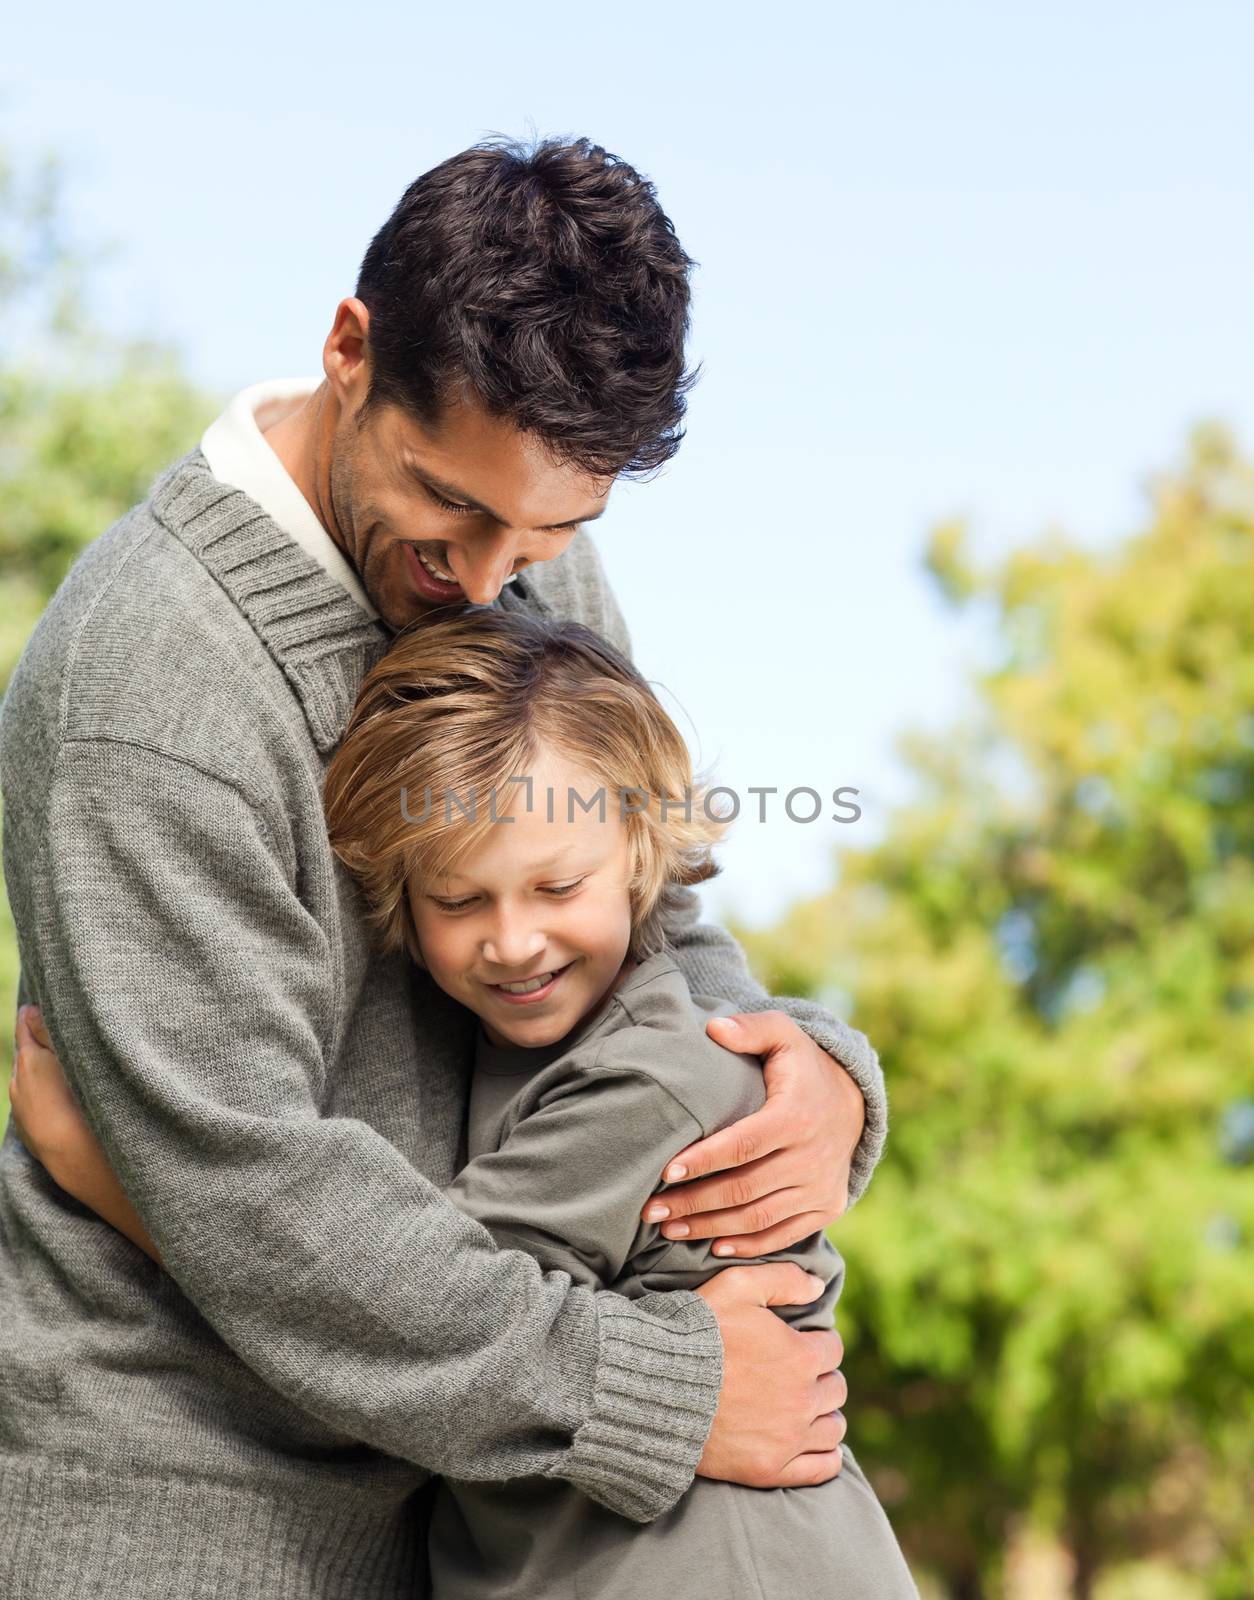 Son embracing his father by Wavebreakmedia